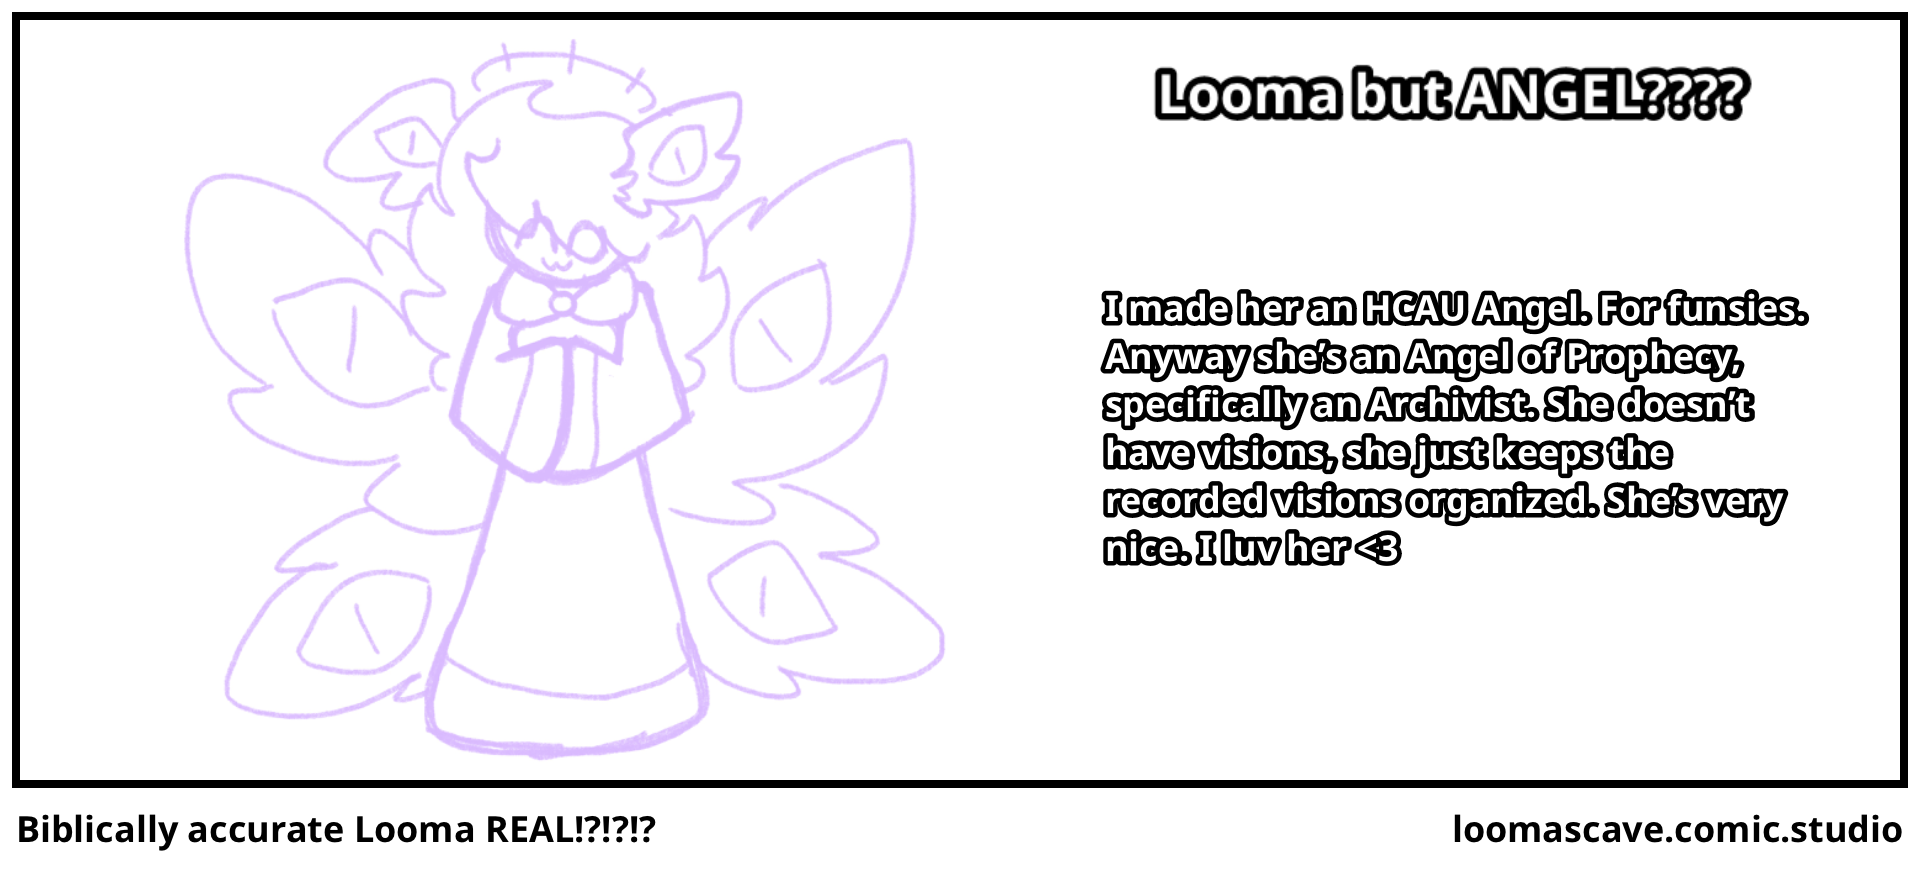 Biblically accurate Looma REAL!?!?!?